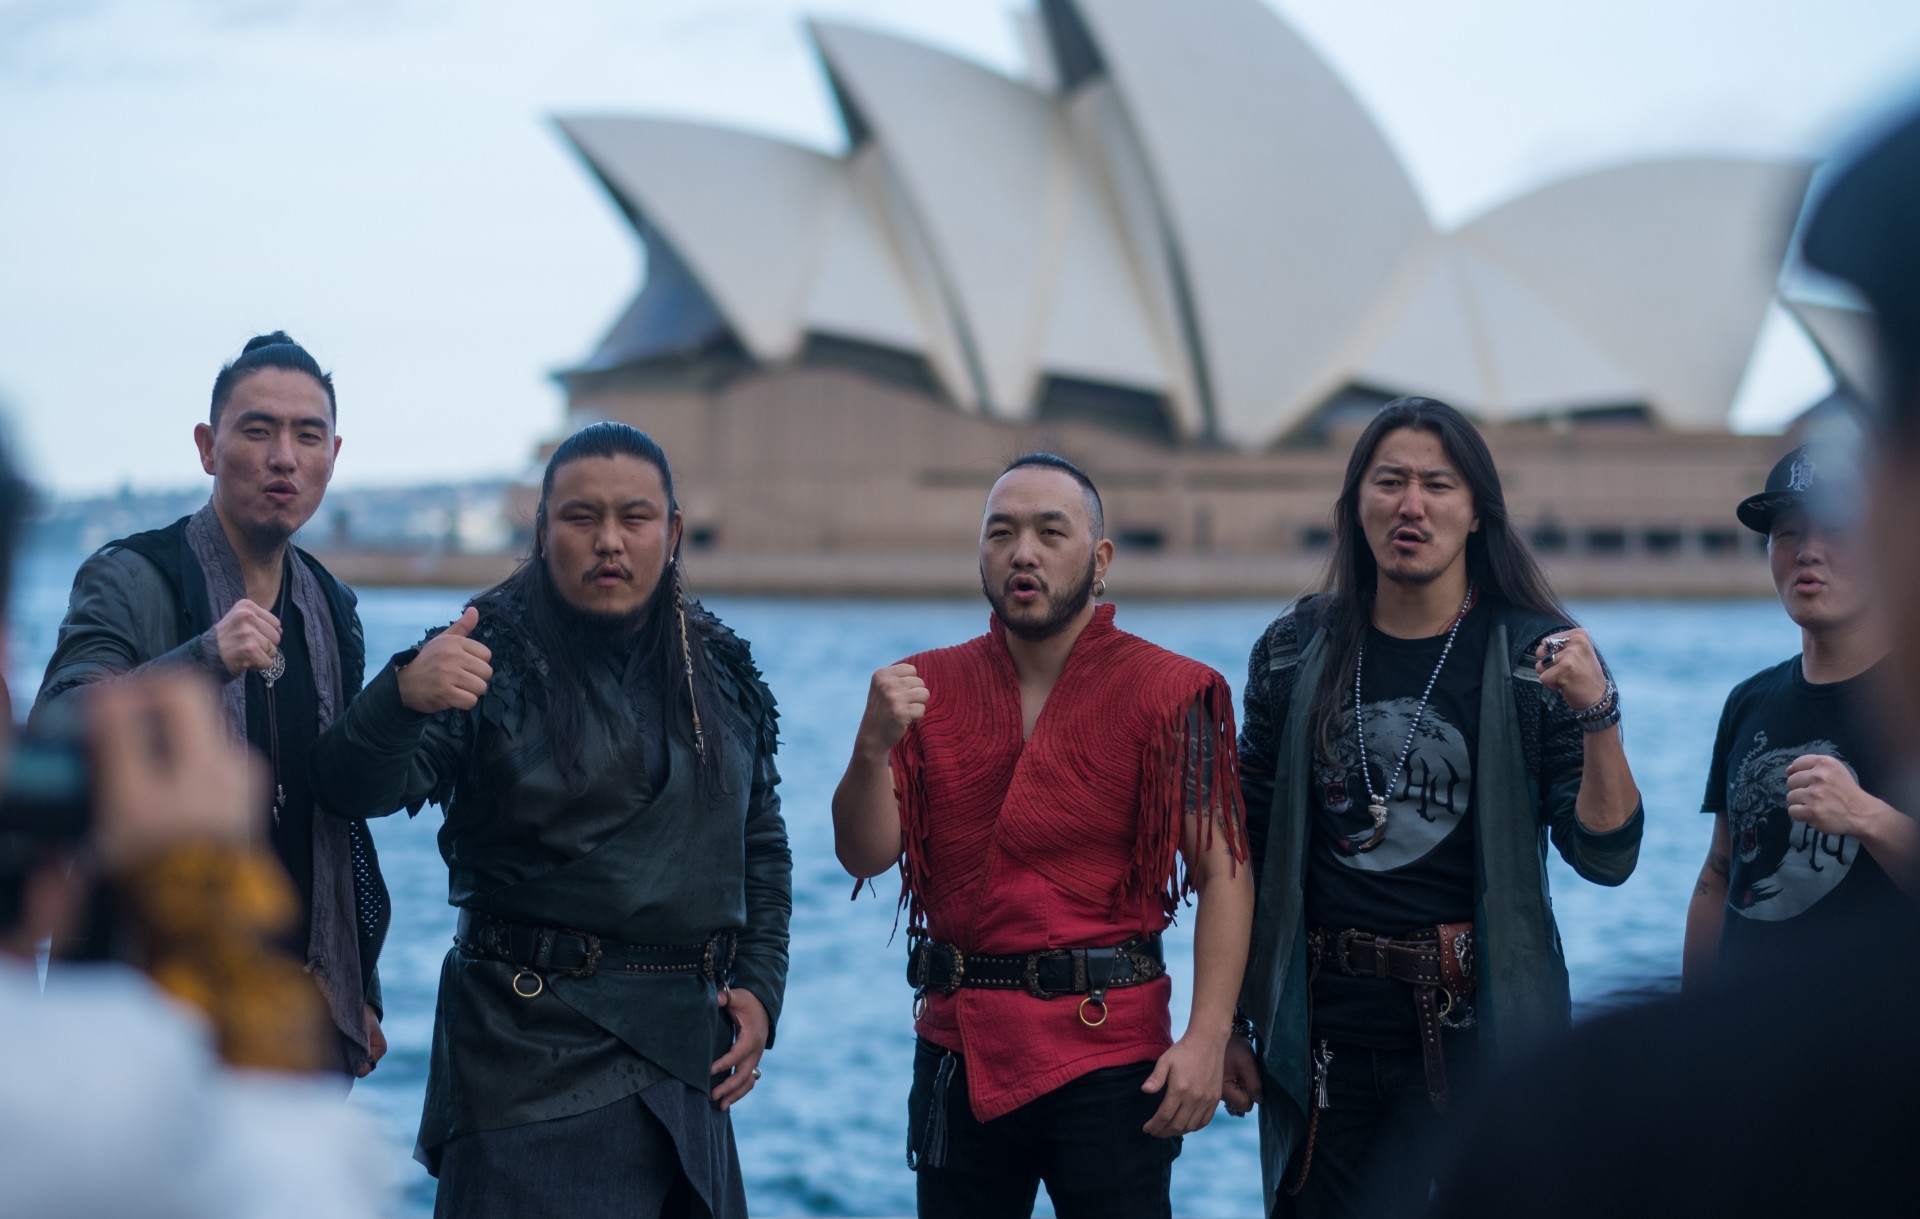 Mongolian metallers The Hu: ‘We want to become one of the legendary bands’